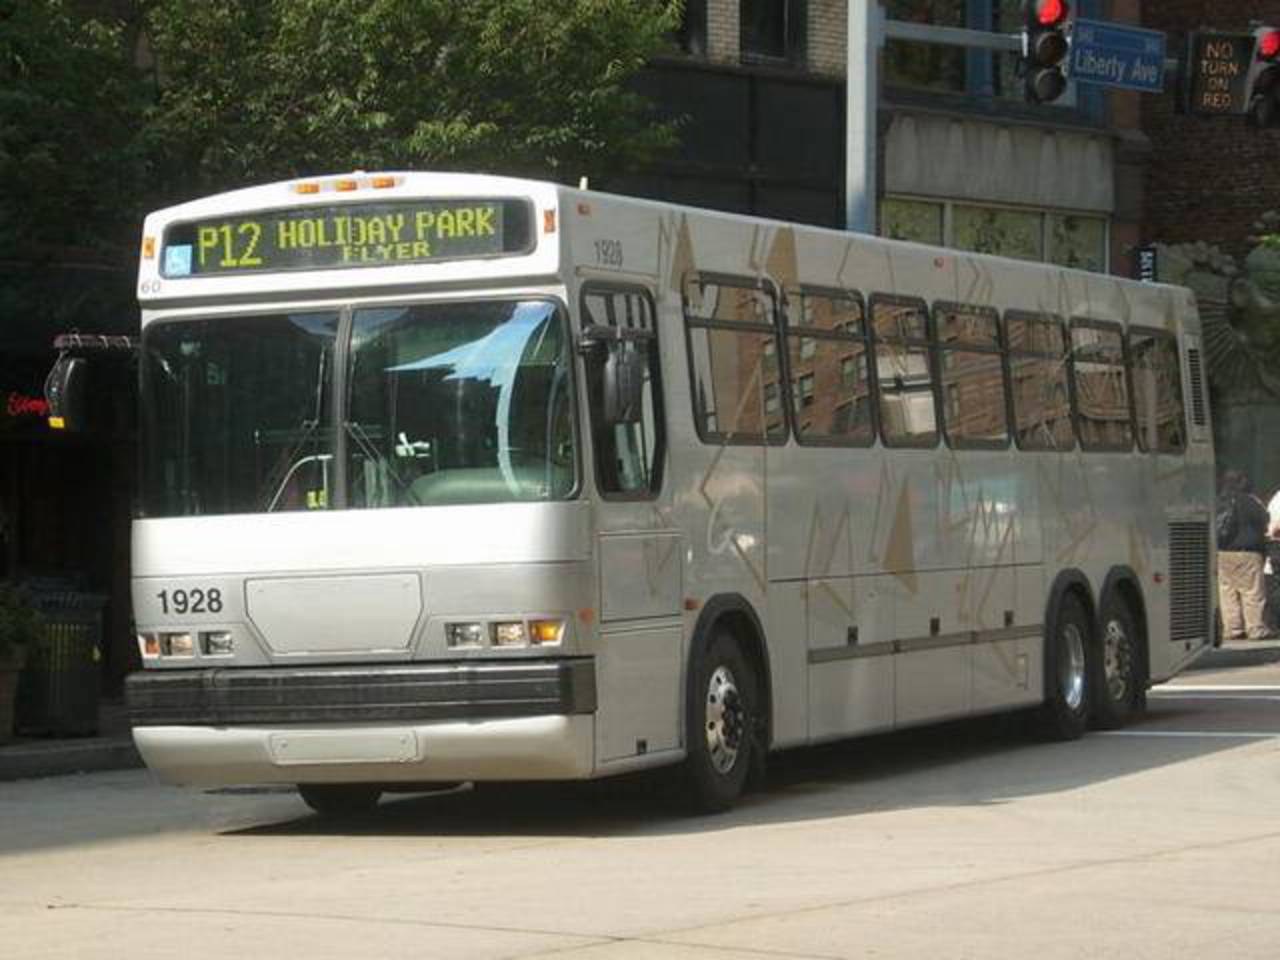 Neoplan P12 Photo Gallery: Photo #12 out of 12, Image Size - 899 x ...